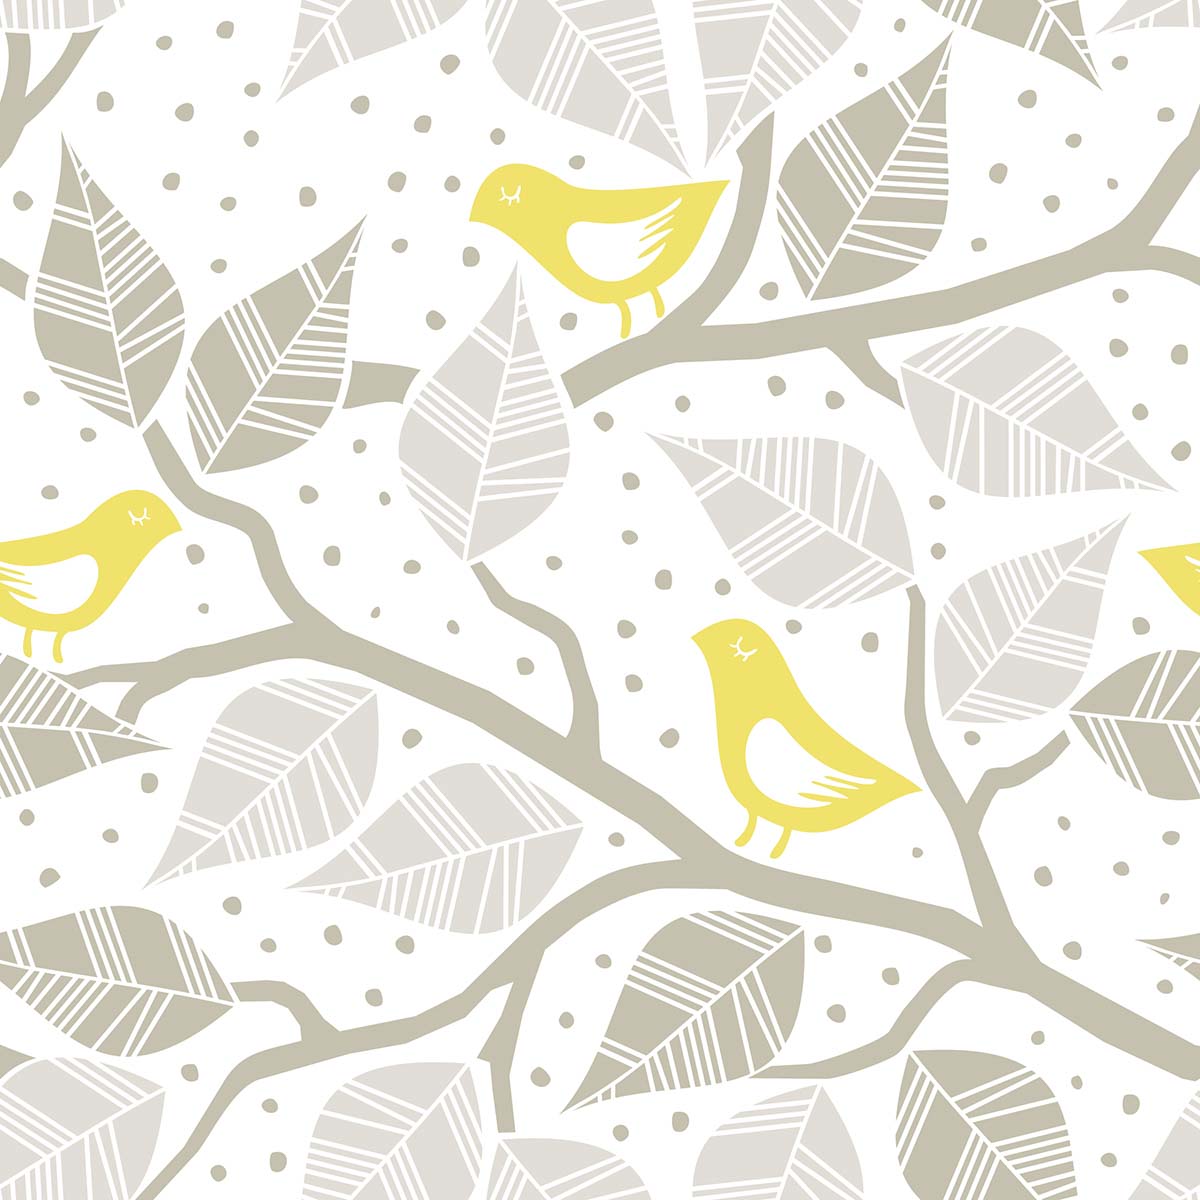 A yellow birds on a tree branch